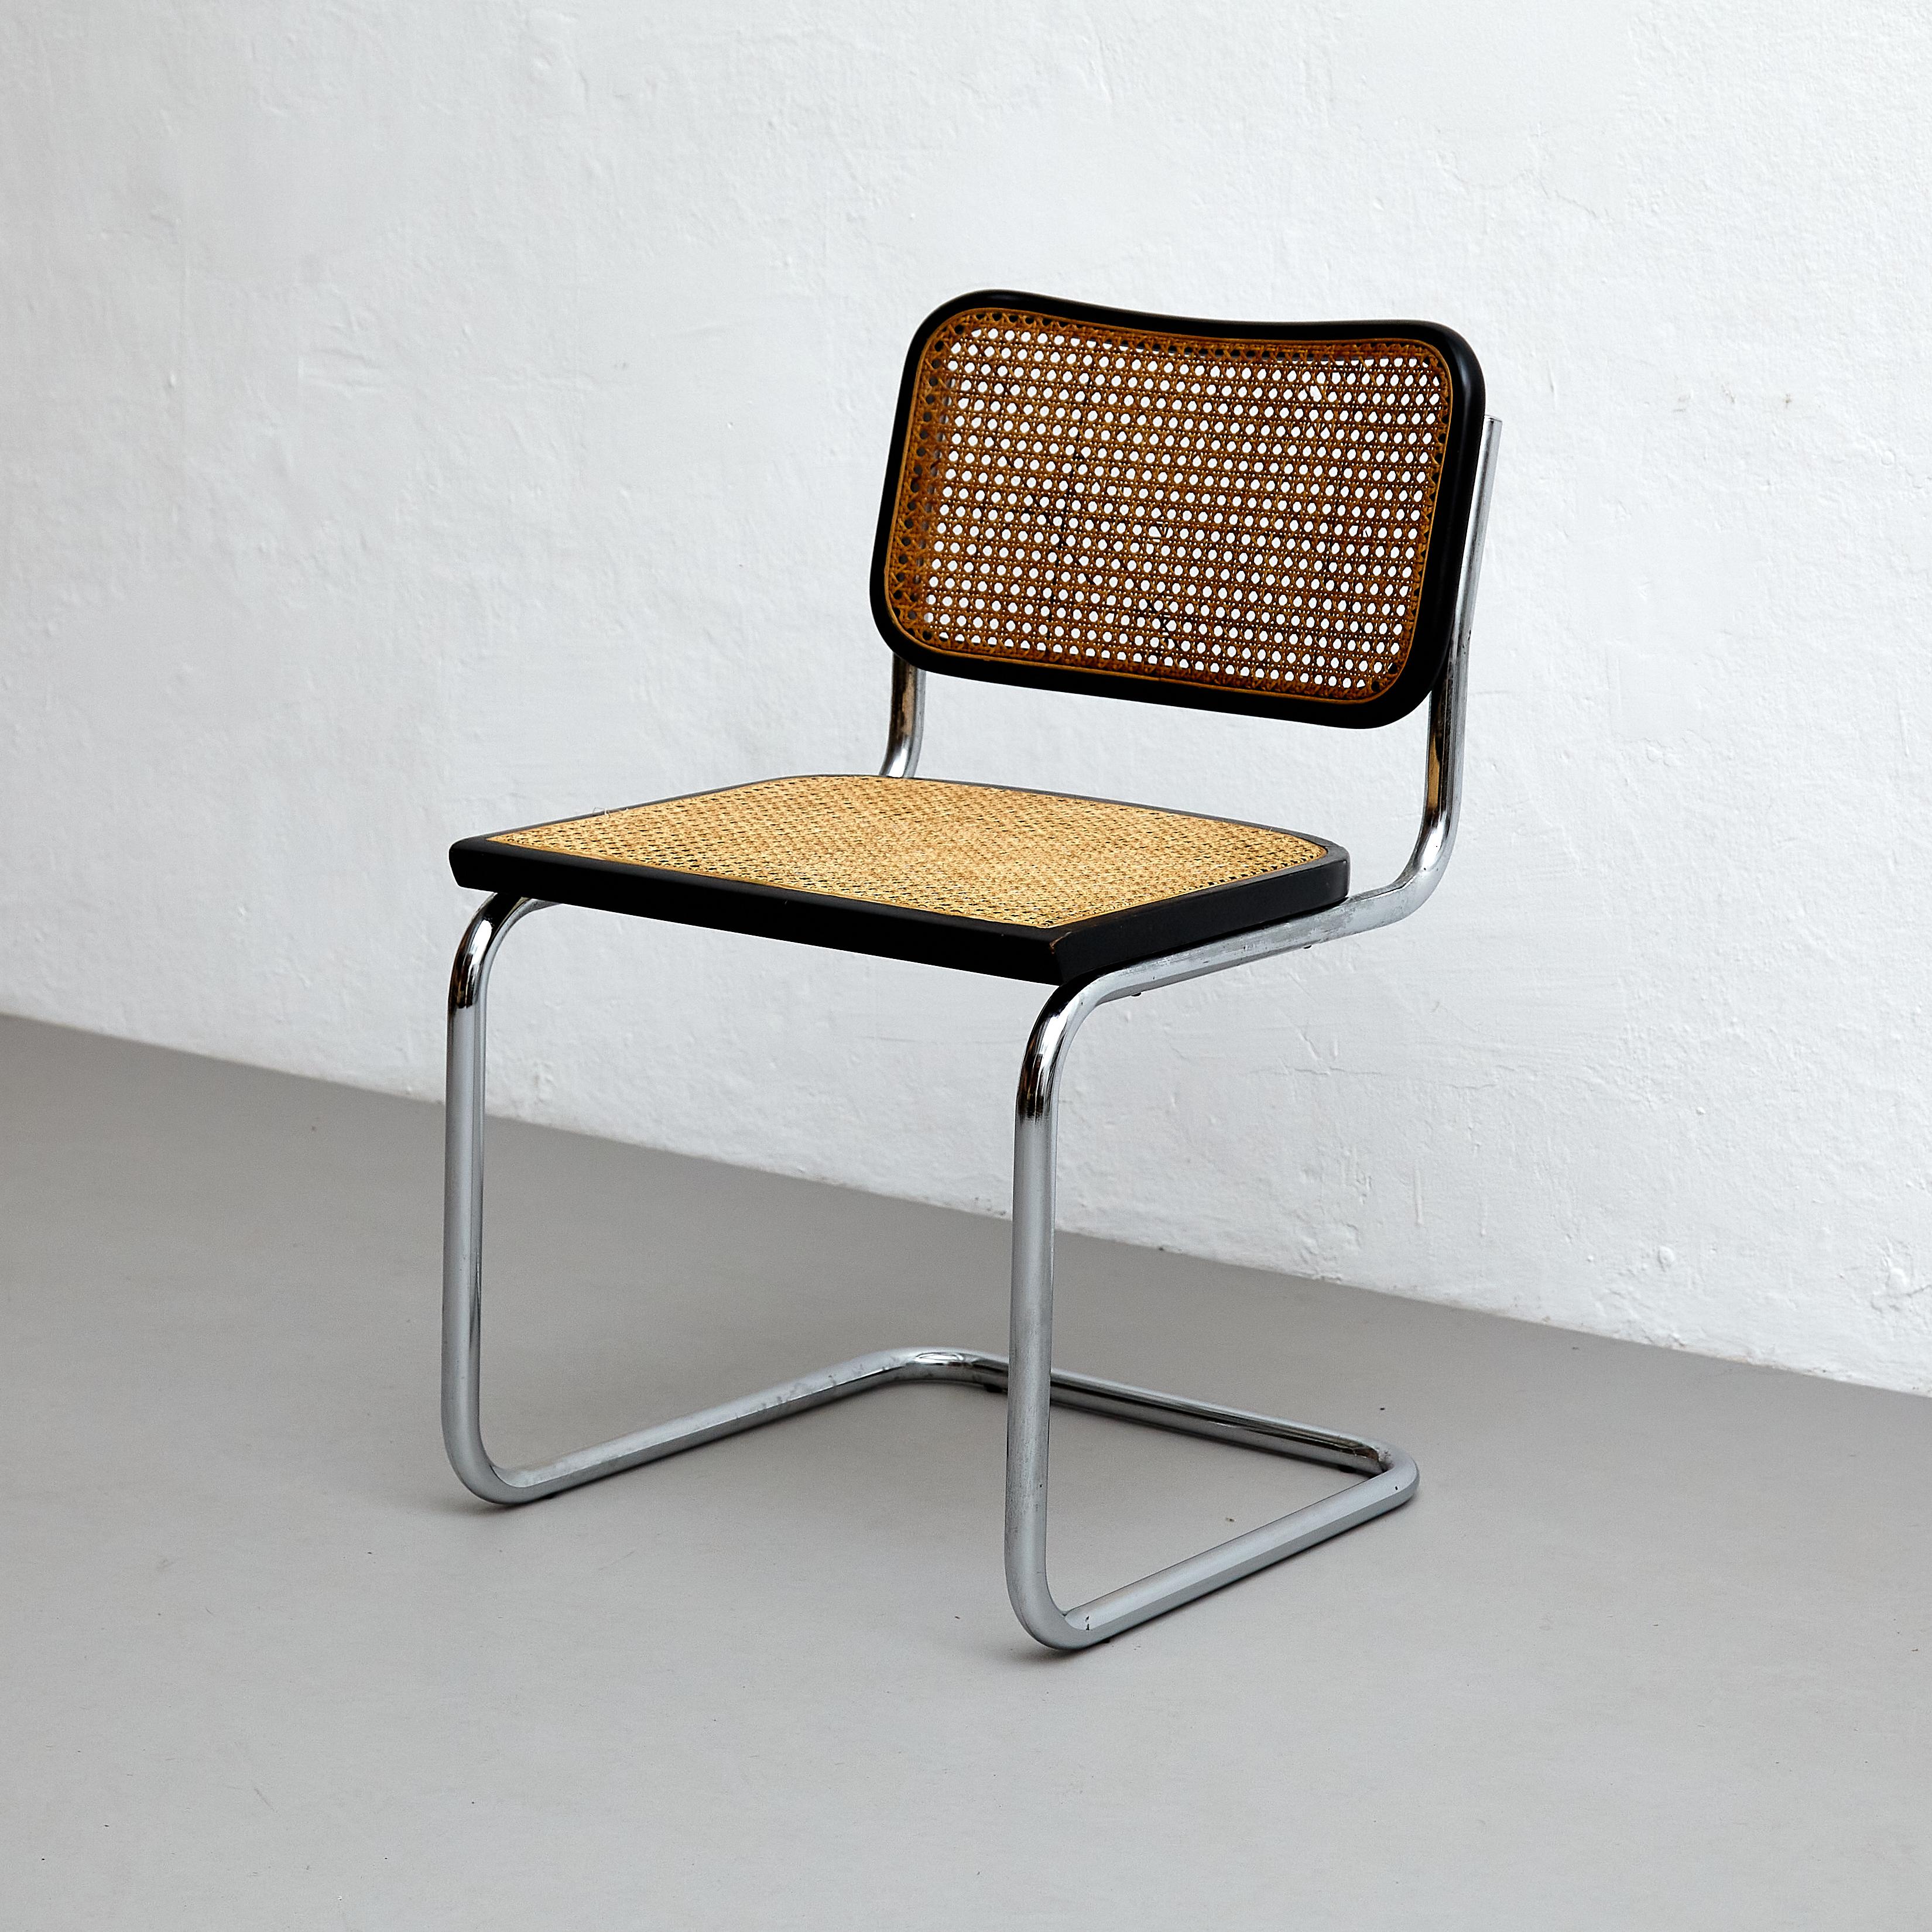 This set of four Cesca chairs, designed by Marcel Breuer, is a true testament to the iconic Bauhaus movement of the 20th century. Manufactured in Italy by an unknown manufacturer circa 1960, these chairs feature a unique combination of materials